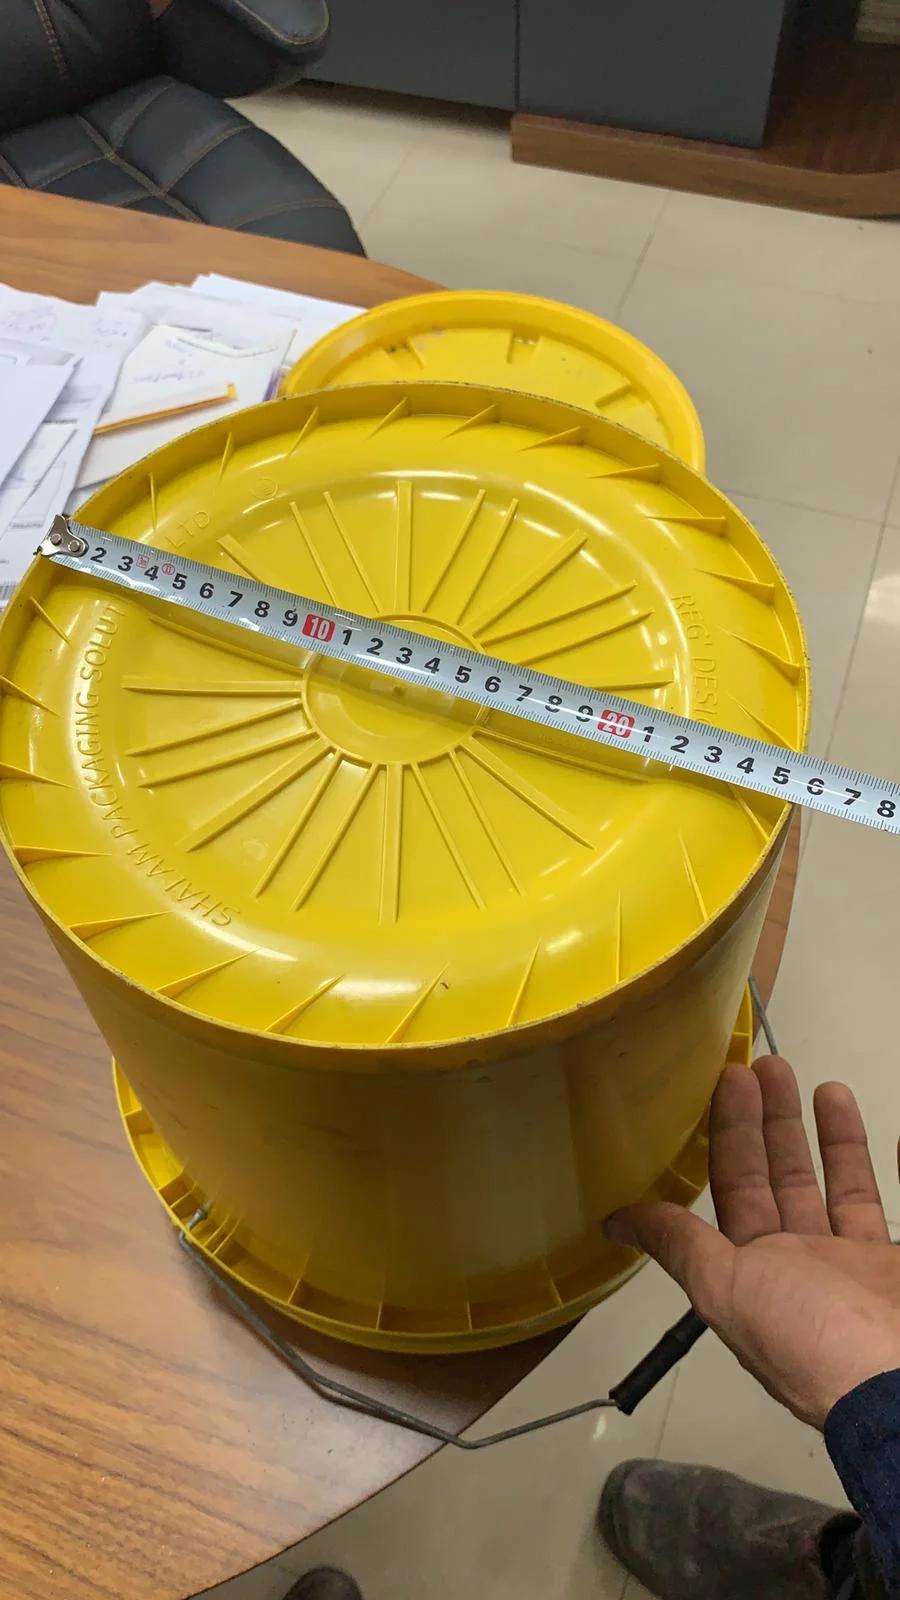 China Manufactory Manufacturer Injection Molded Plastic Bucket Mold